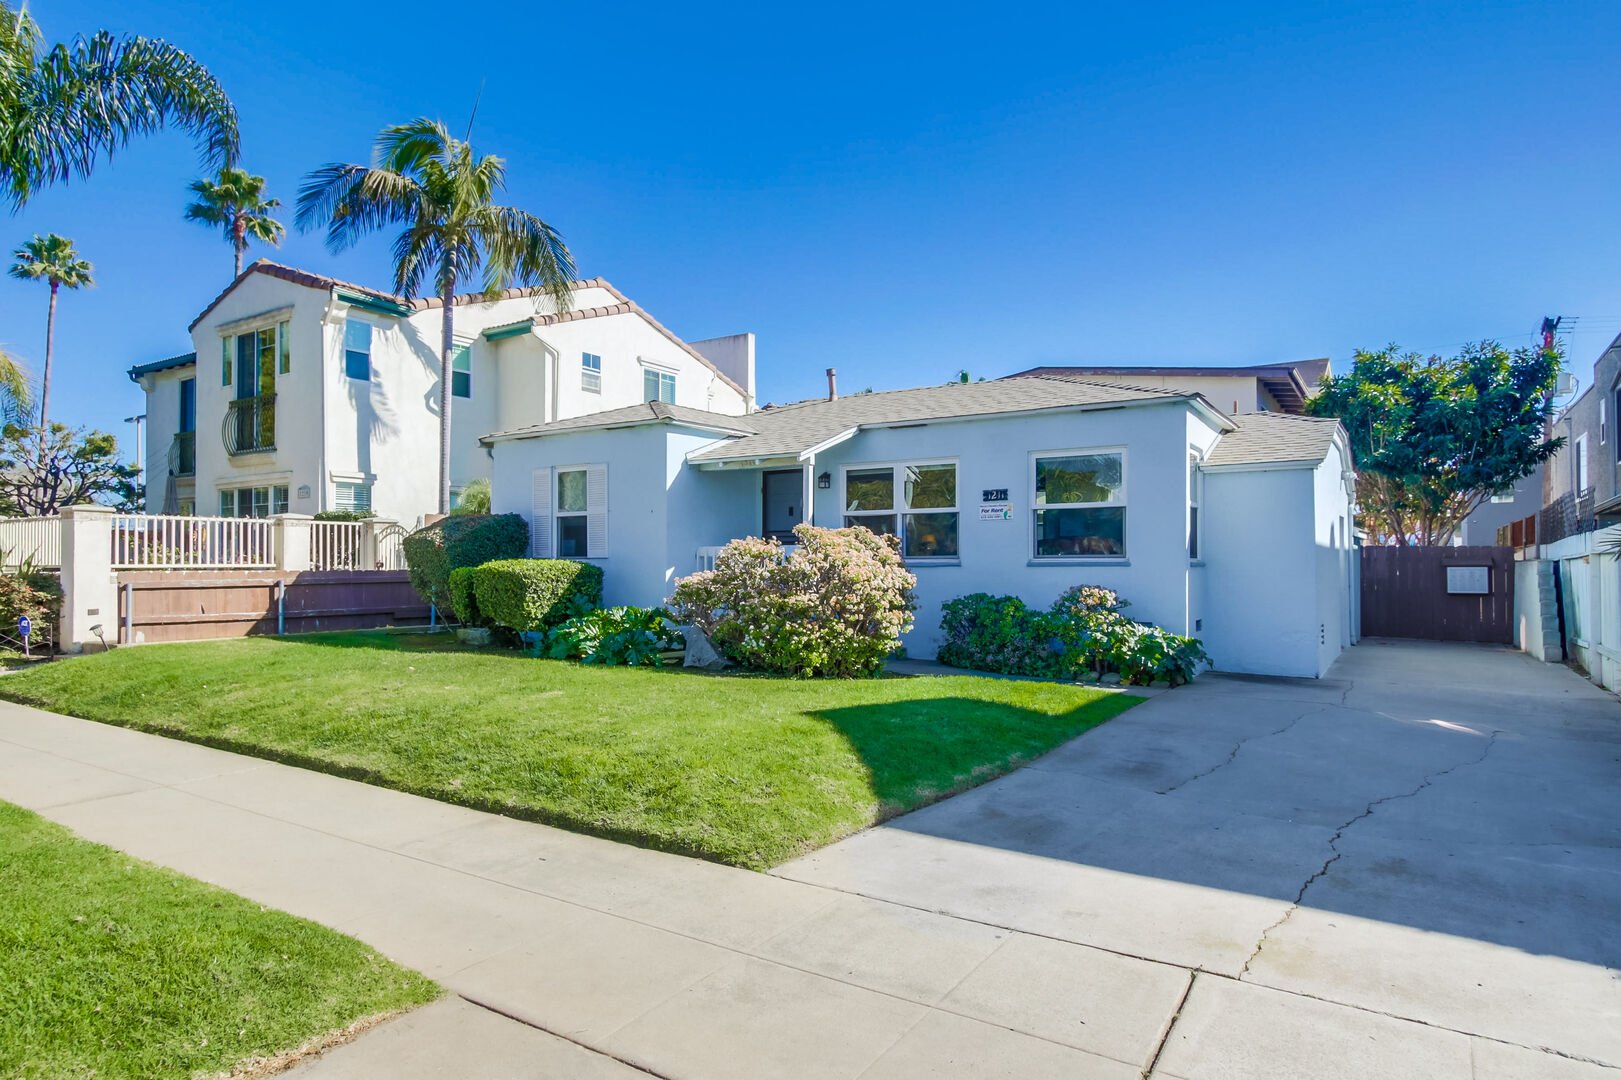 Located on Felspar St in a prime location, walking distance to the beach, grocery store, restaurants and shopping. Parking this close is a luxury!